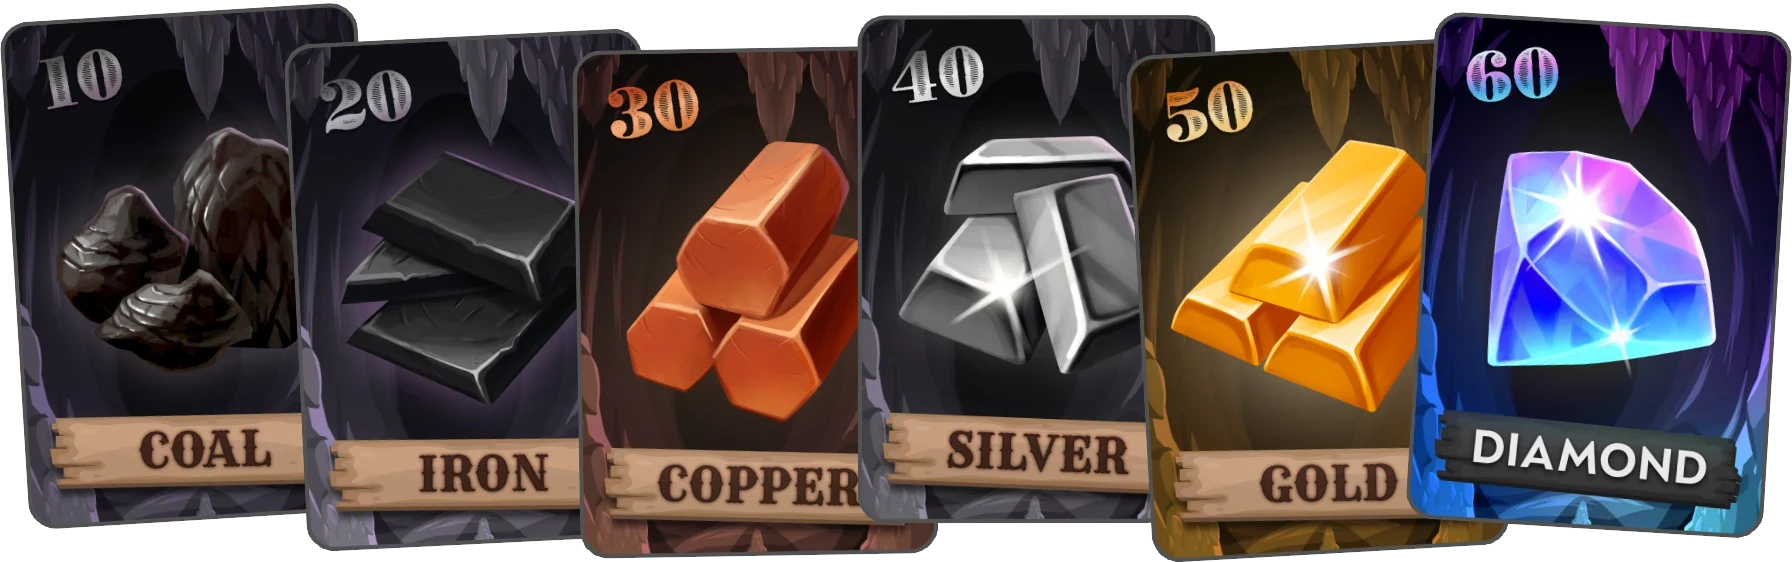 Coal, iron, copper, silver, gold, and diamond cards